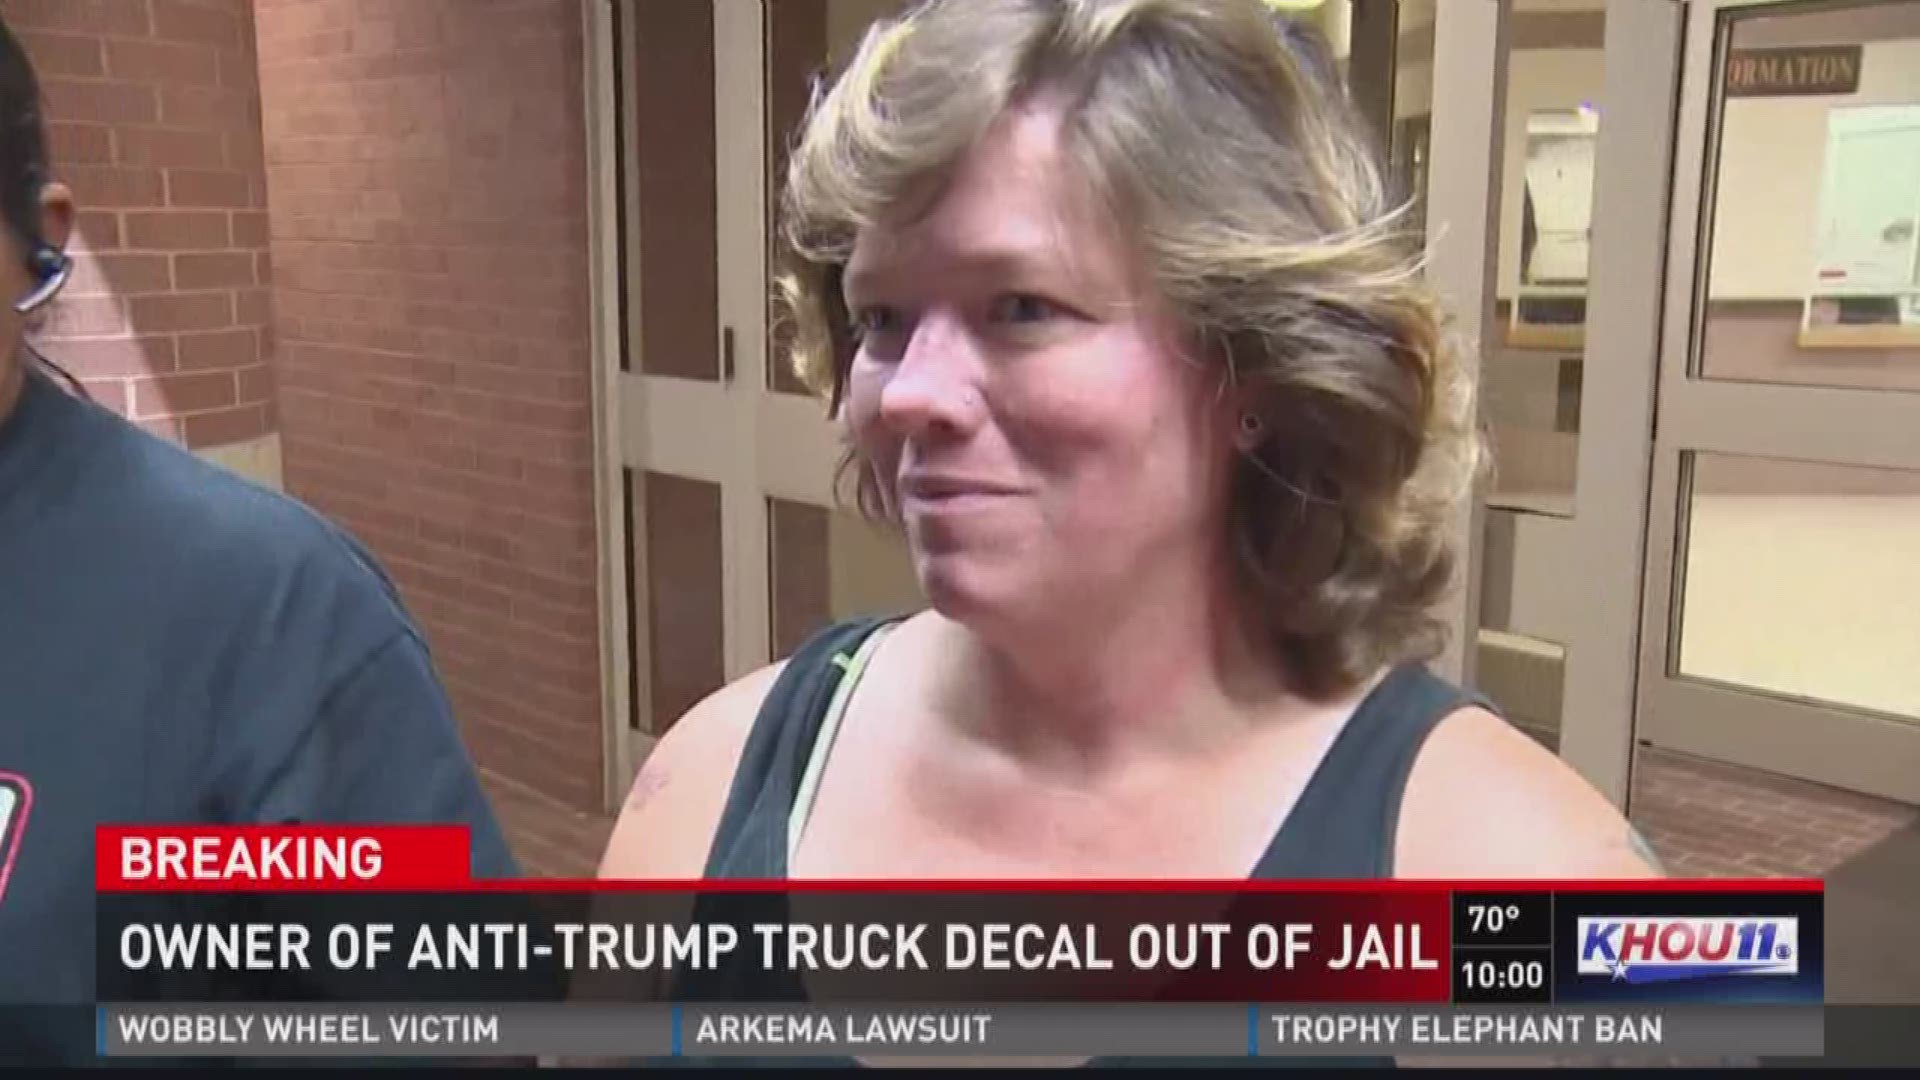 The owner of the truck with a "F__k Trump" sticker was released from jail Thursday night after her husband posted her bond.